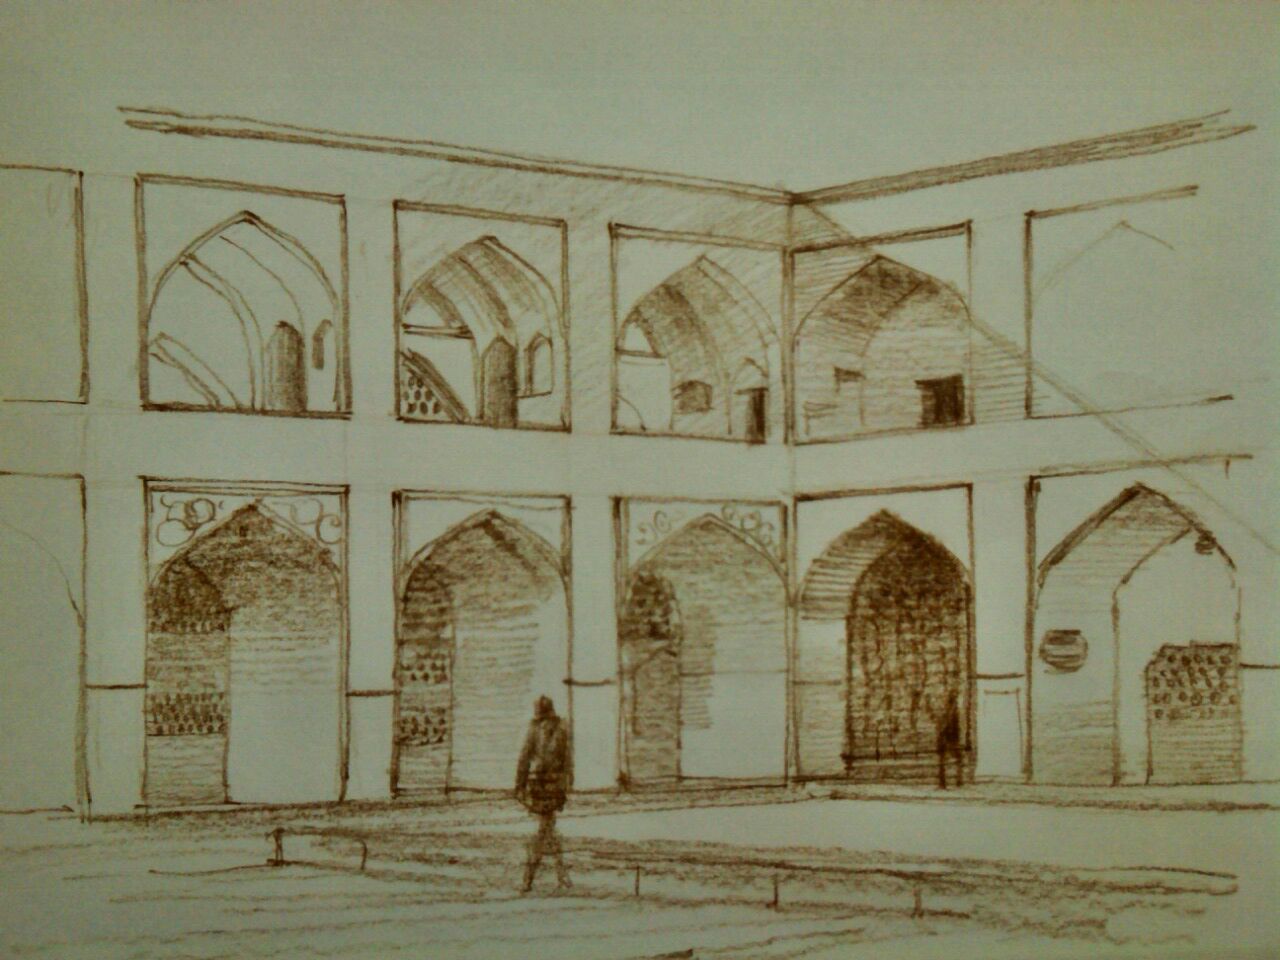 Jame mosque of Isfahan